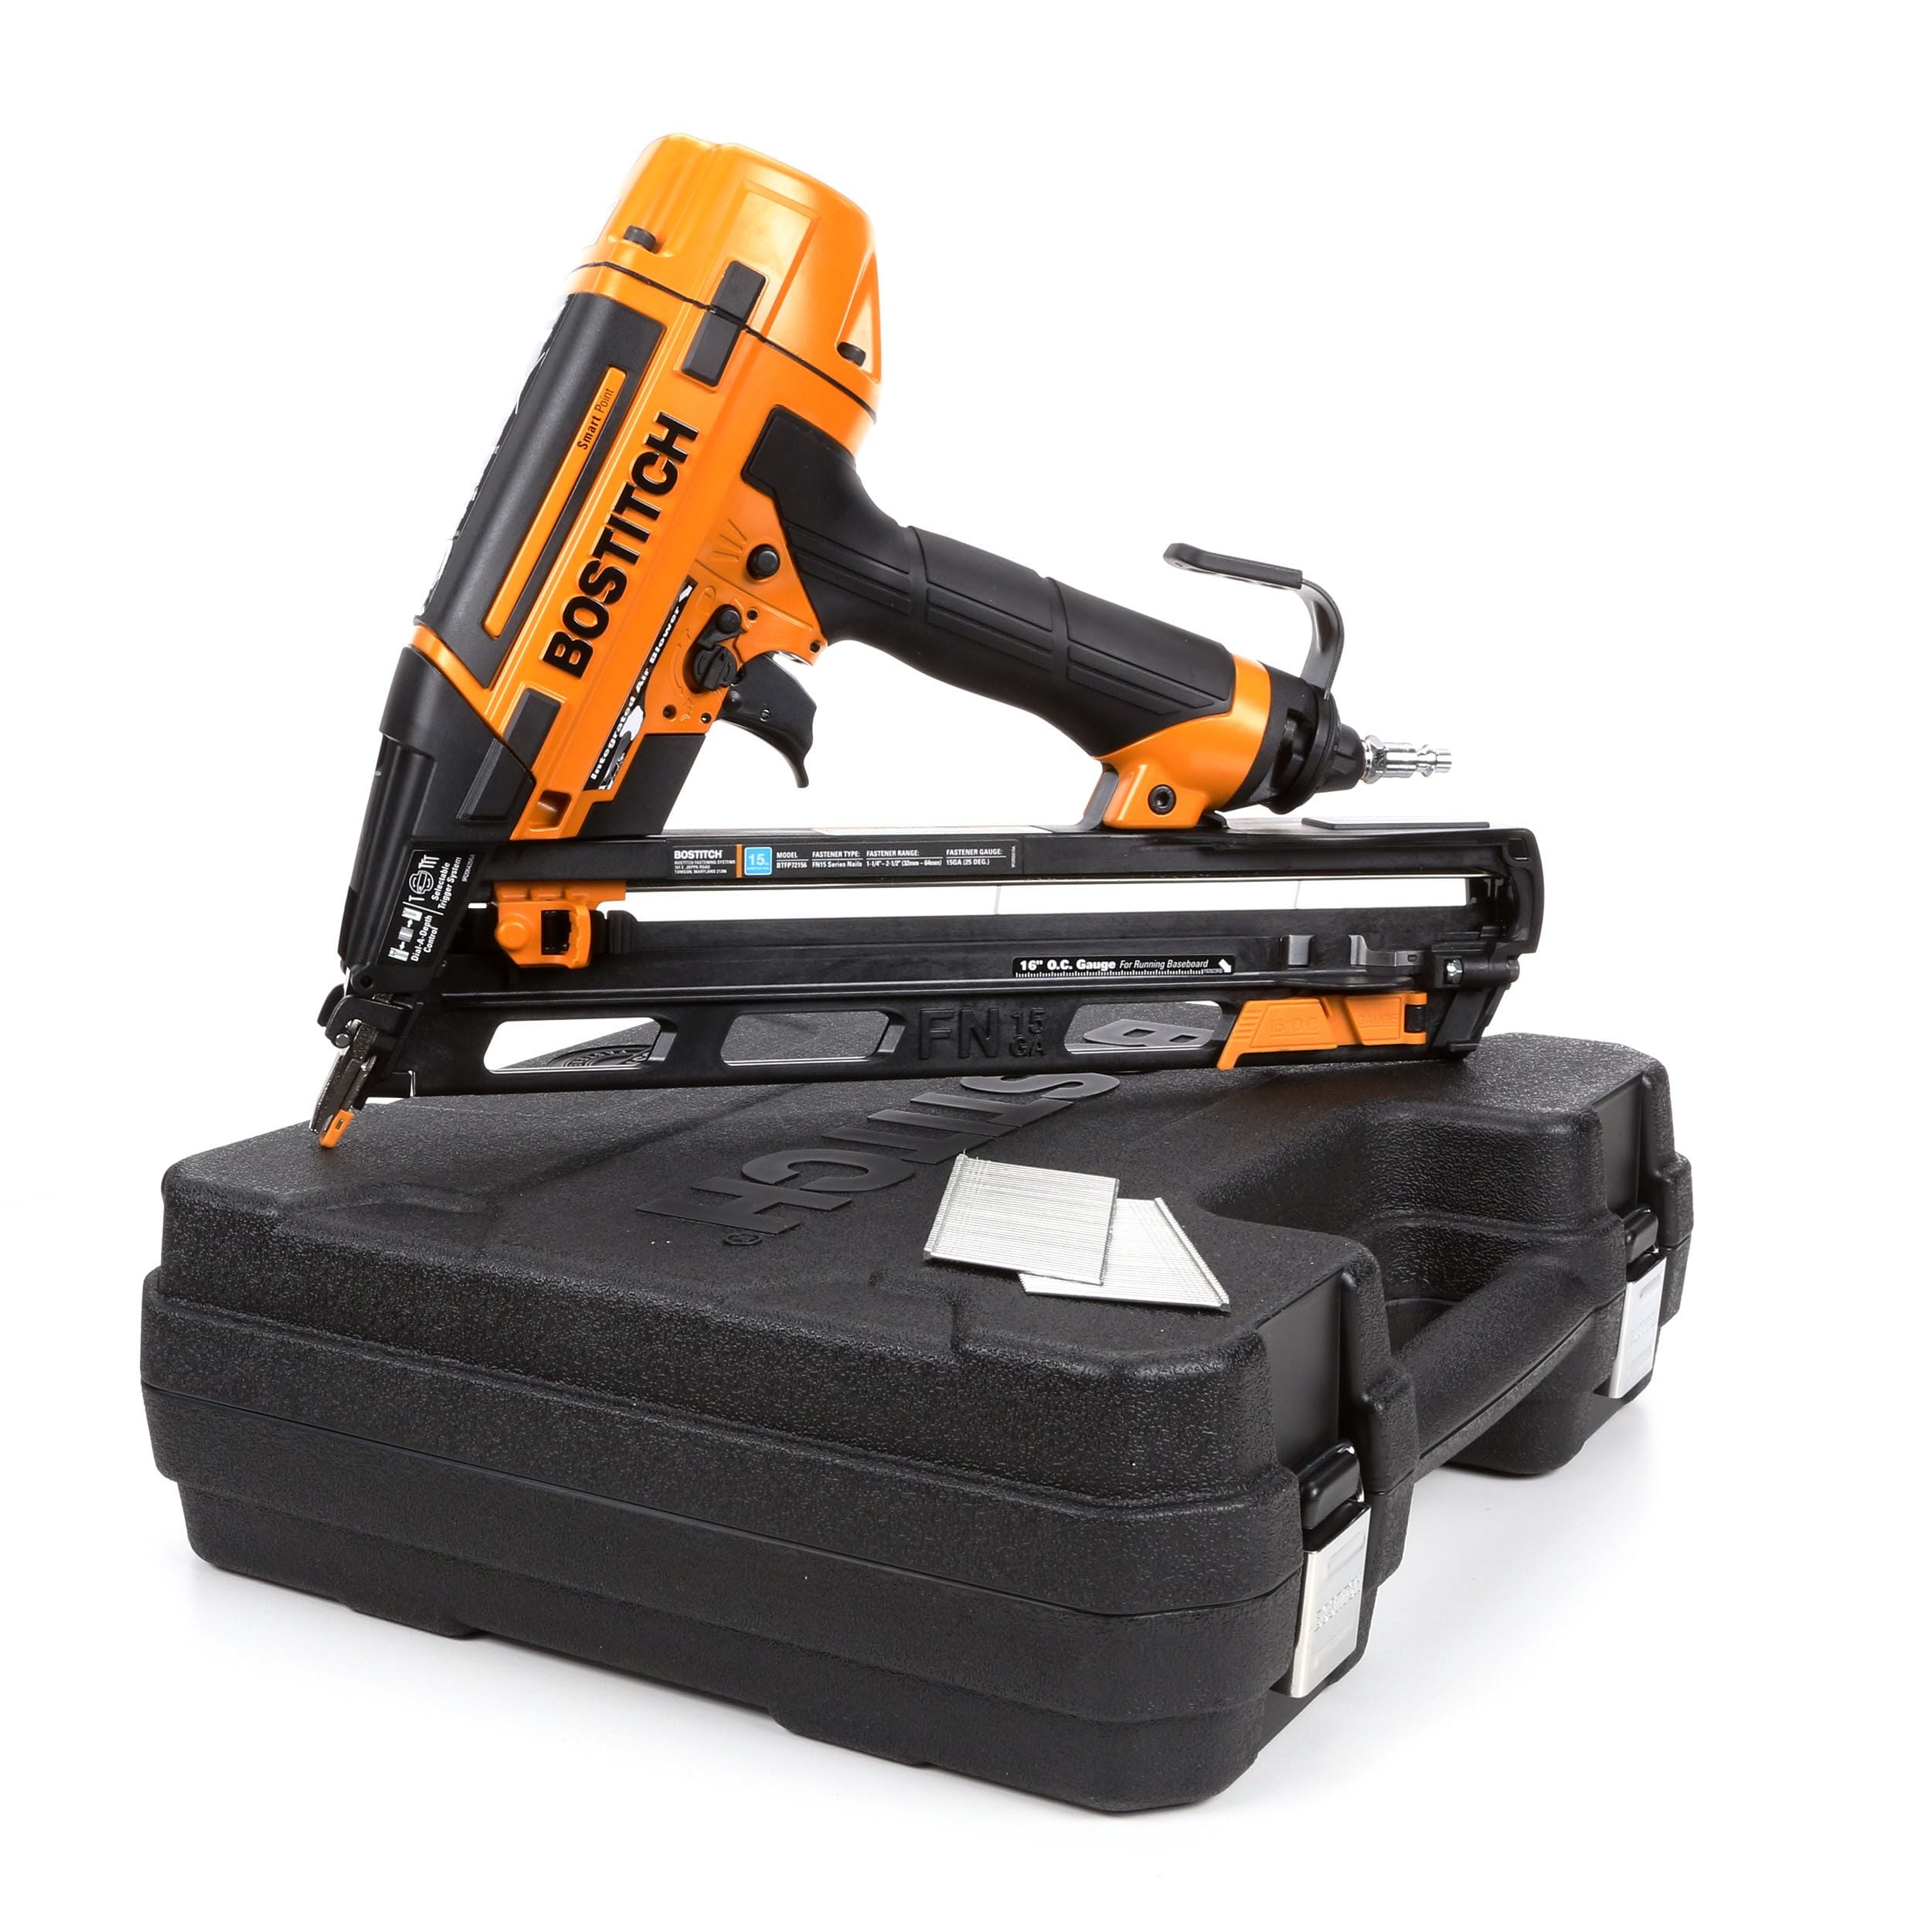 Bostitch Stanley Bostitch 15-Gauge Oil-Free Angled Finished Nailer 